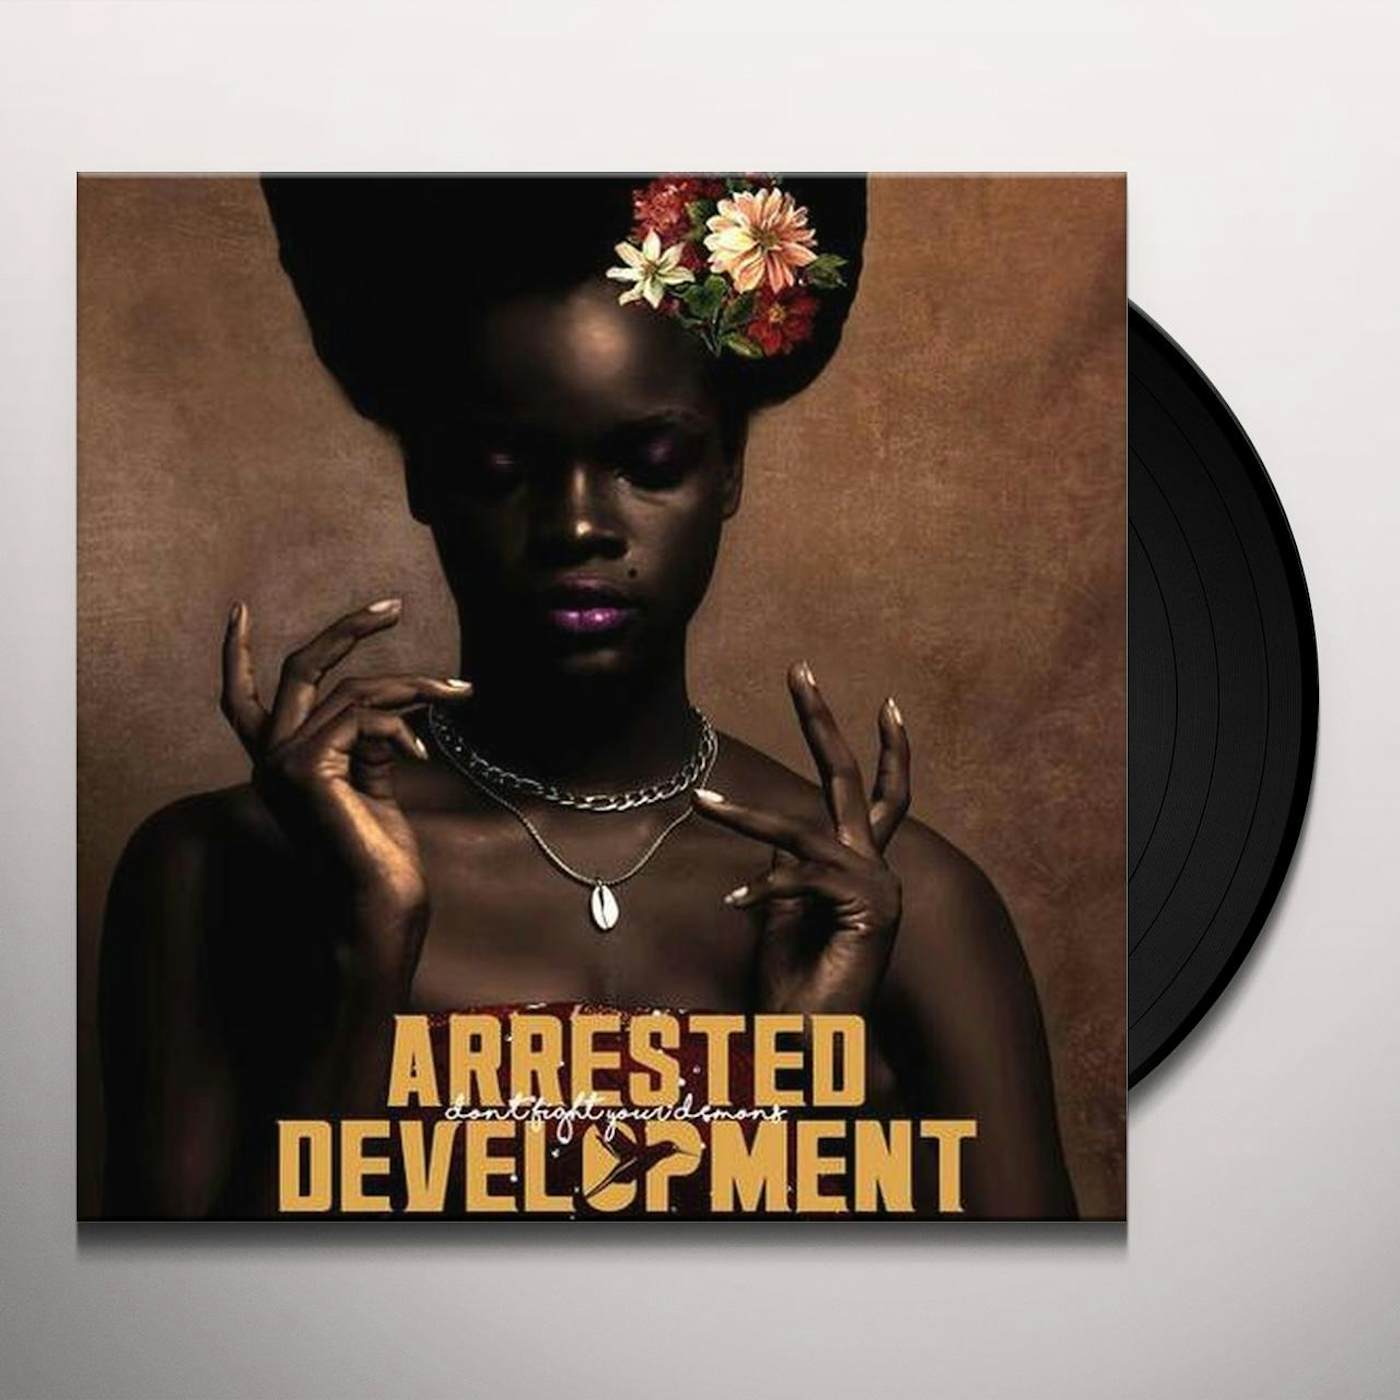 Arrested Development DON'T FIGHT YOUR DEMONS (YELLOW & BROWN VINYL) Vinyl Record